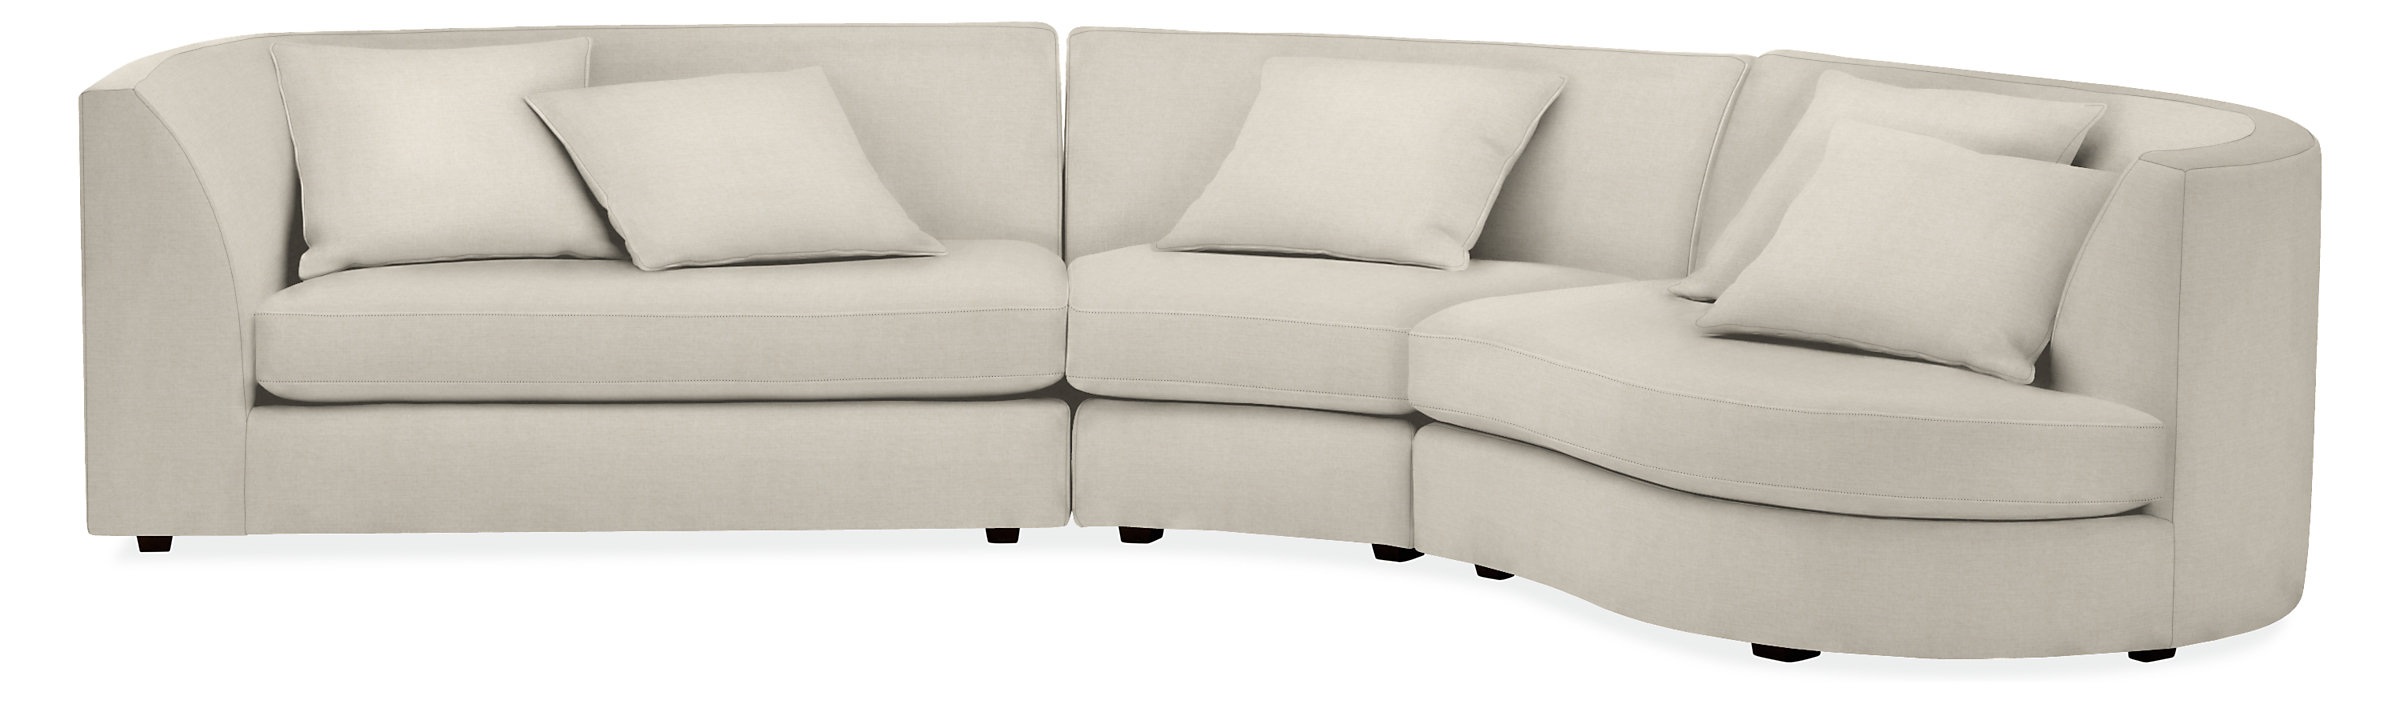 Astaire 132x77" Three-Piece Sectional Sofa with Left-Arm Sofa